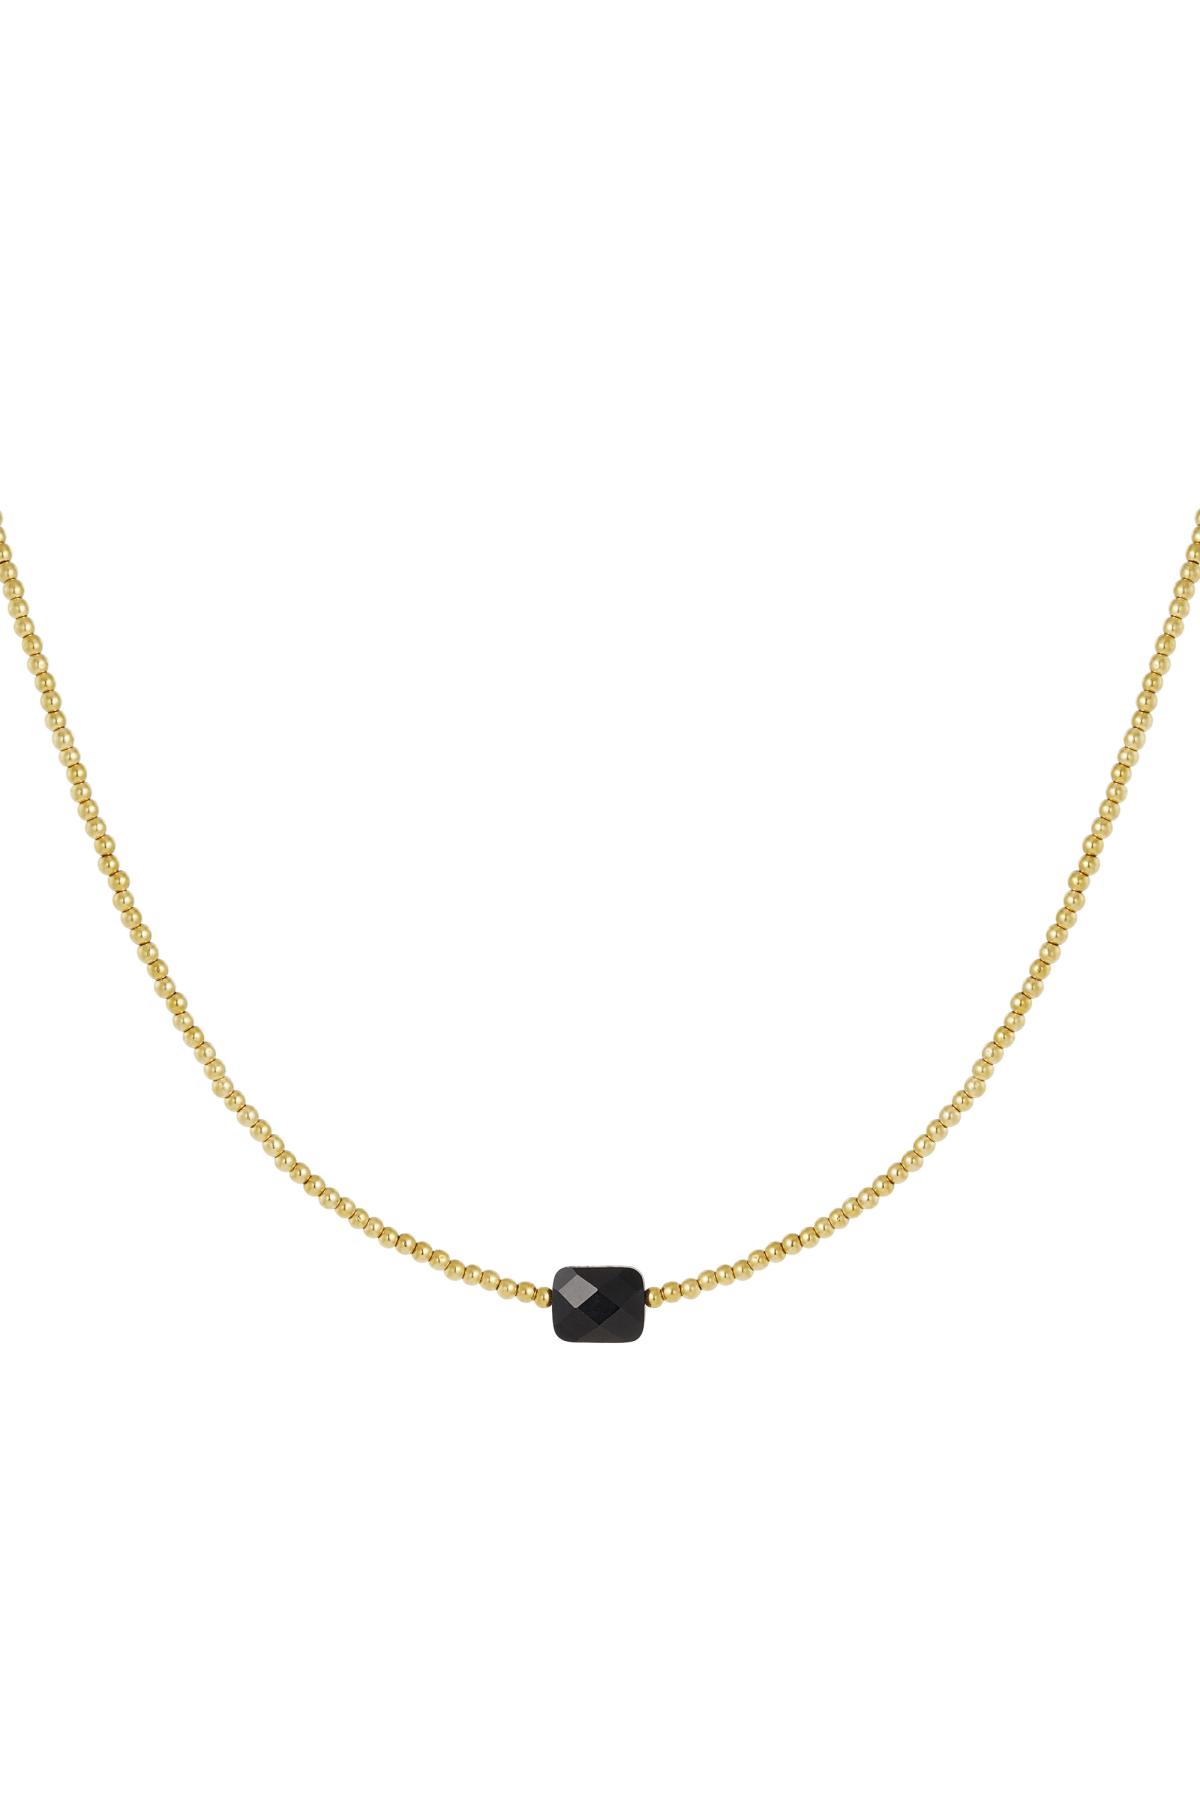 Necklace beads with large stone - Natural stone collection Black &amp; Gold Stainless Steel